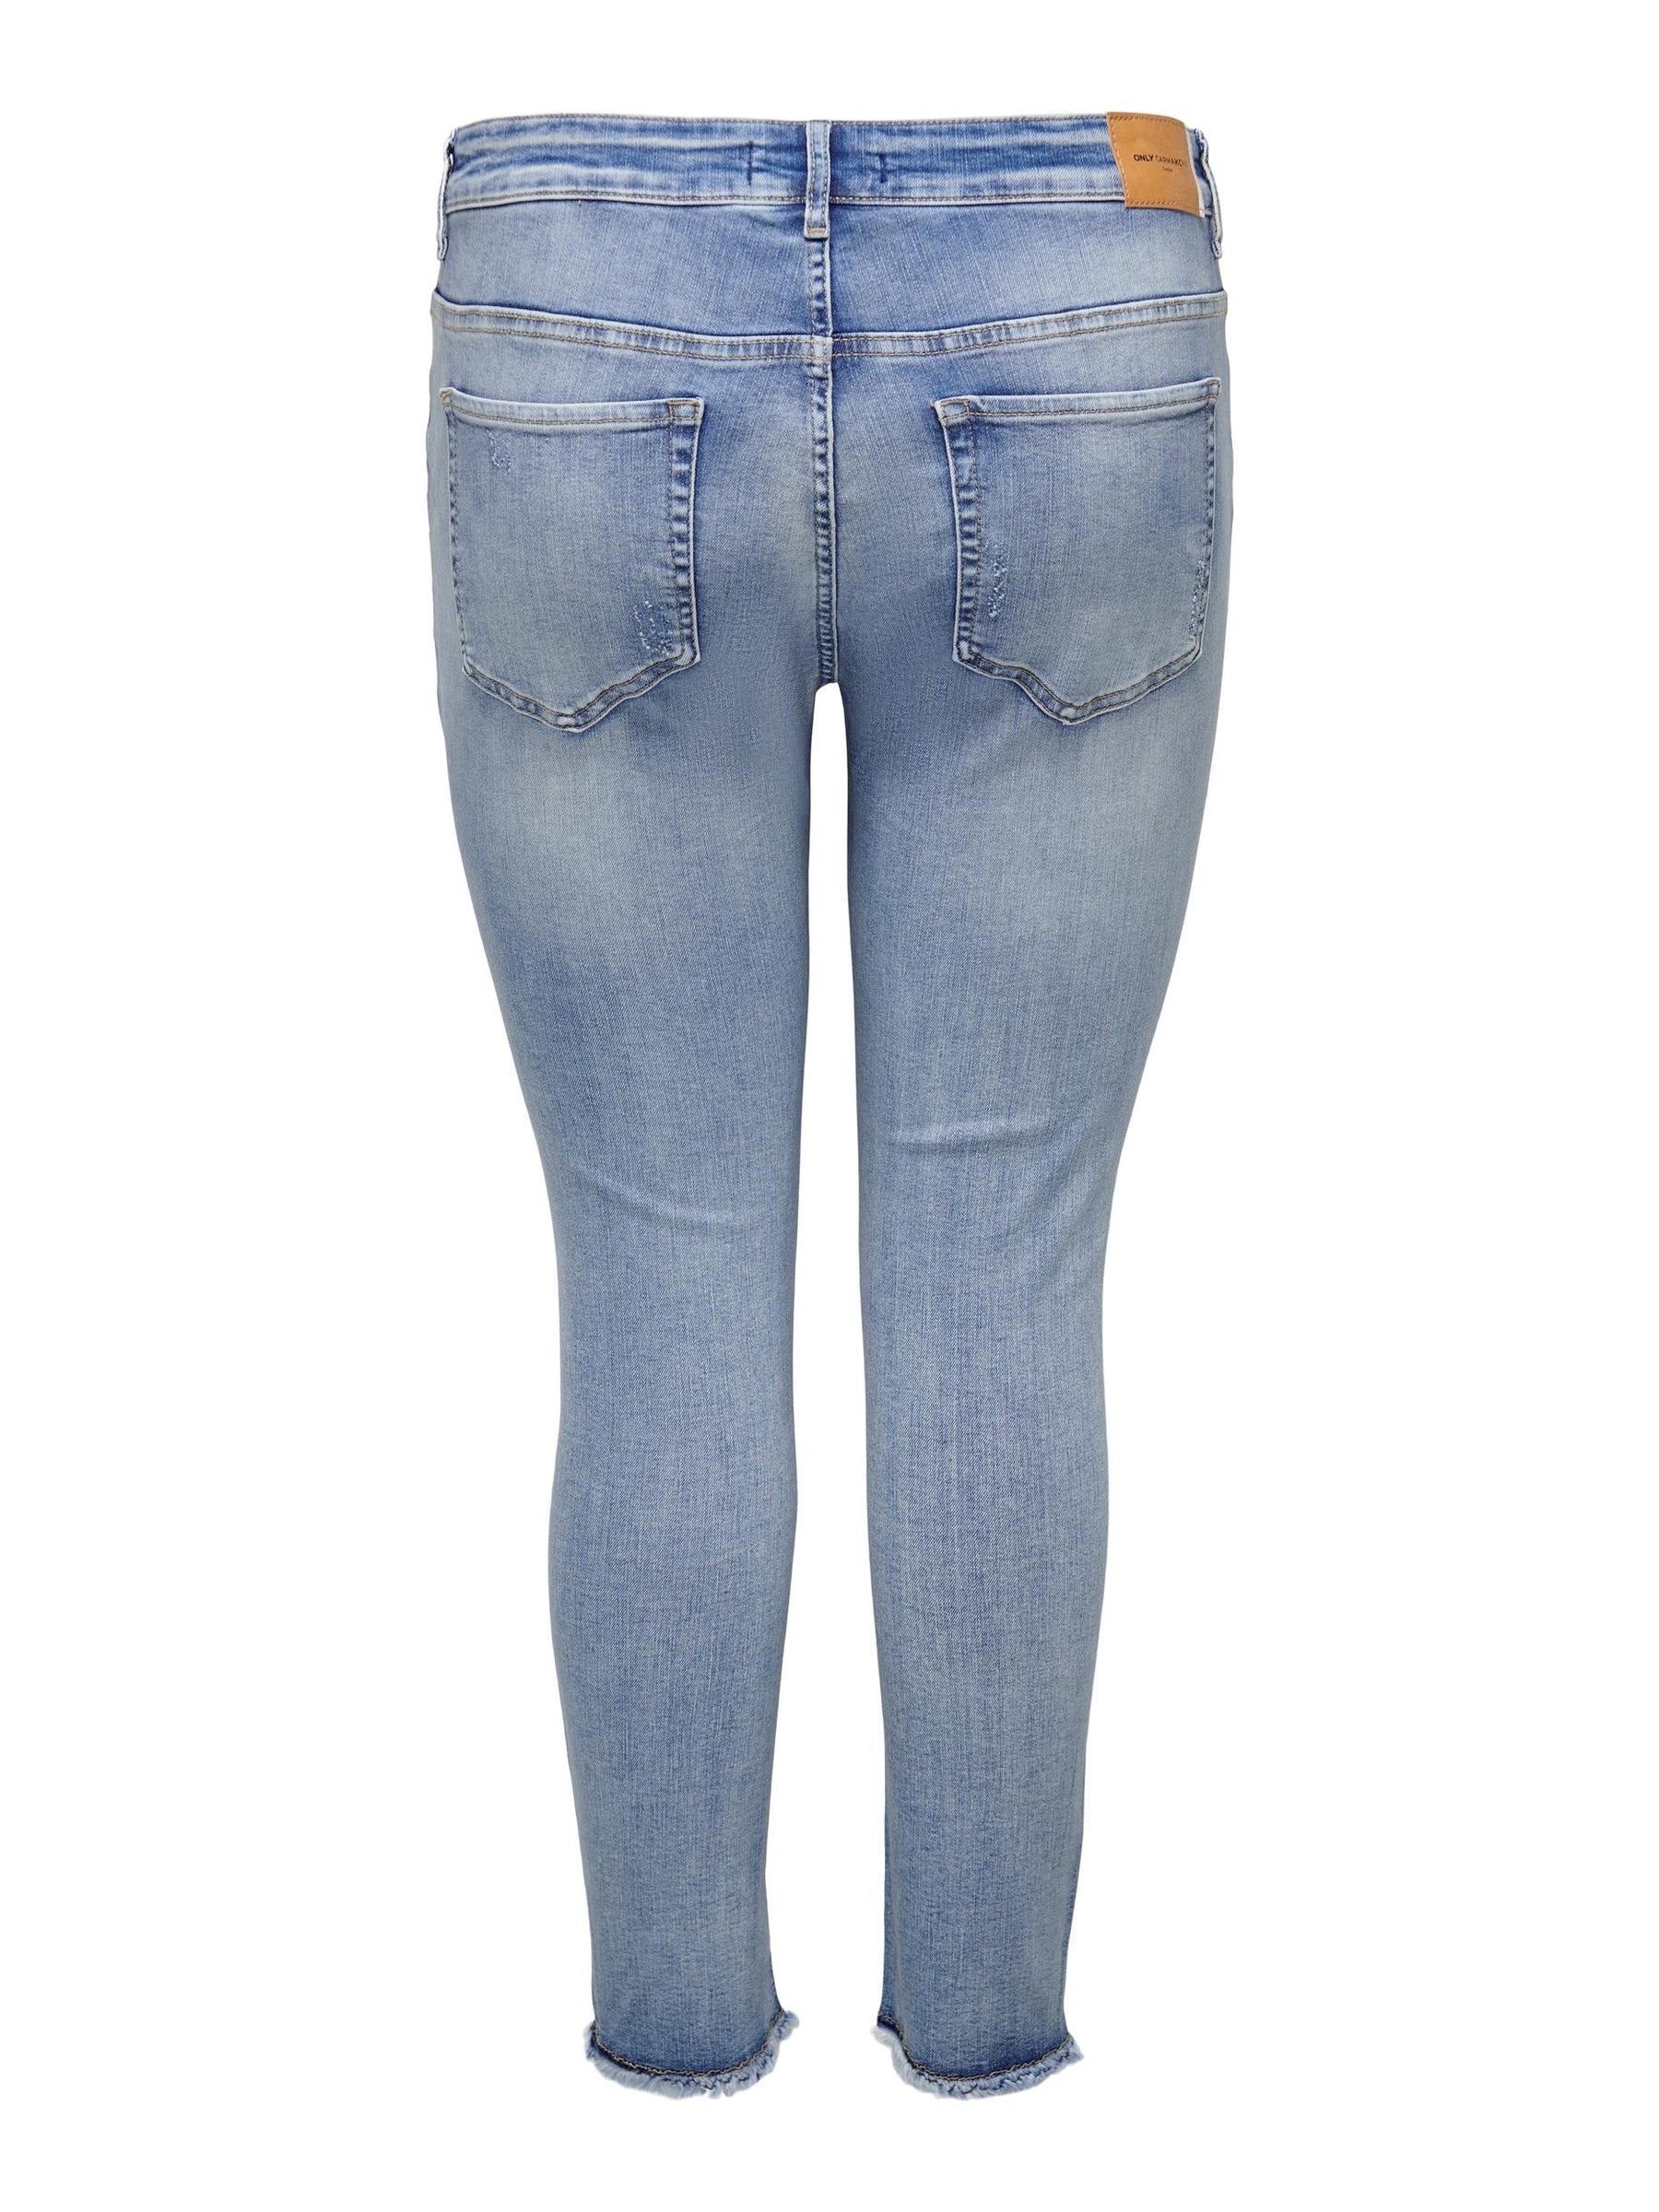 Only Distressed Jeans in Light Blue - Wardrobe Plus